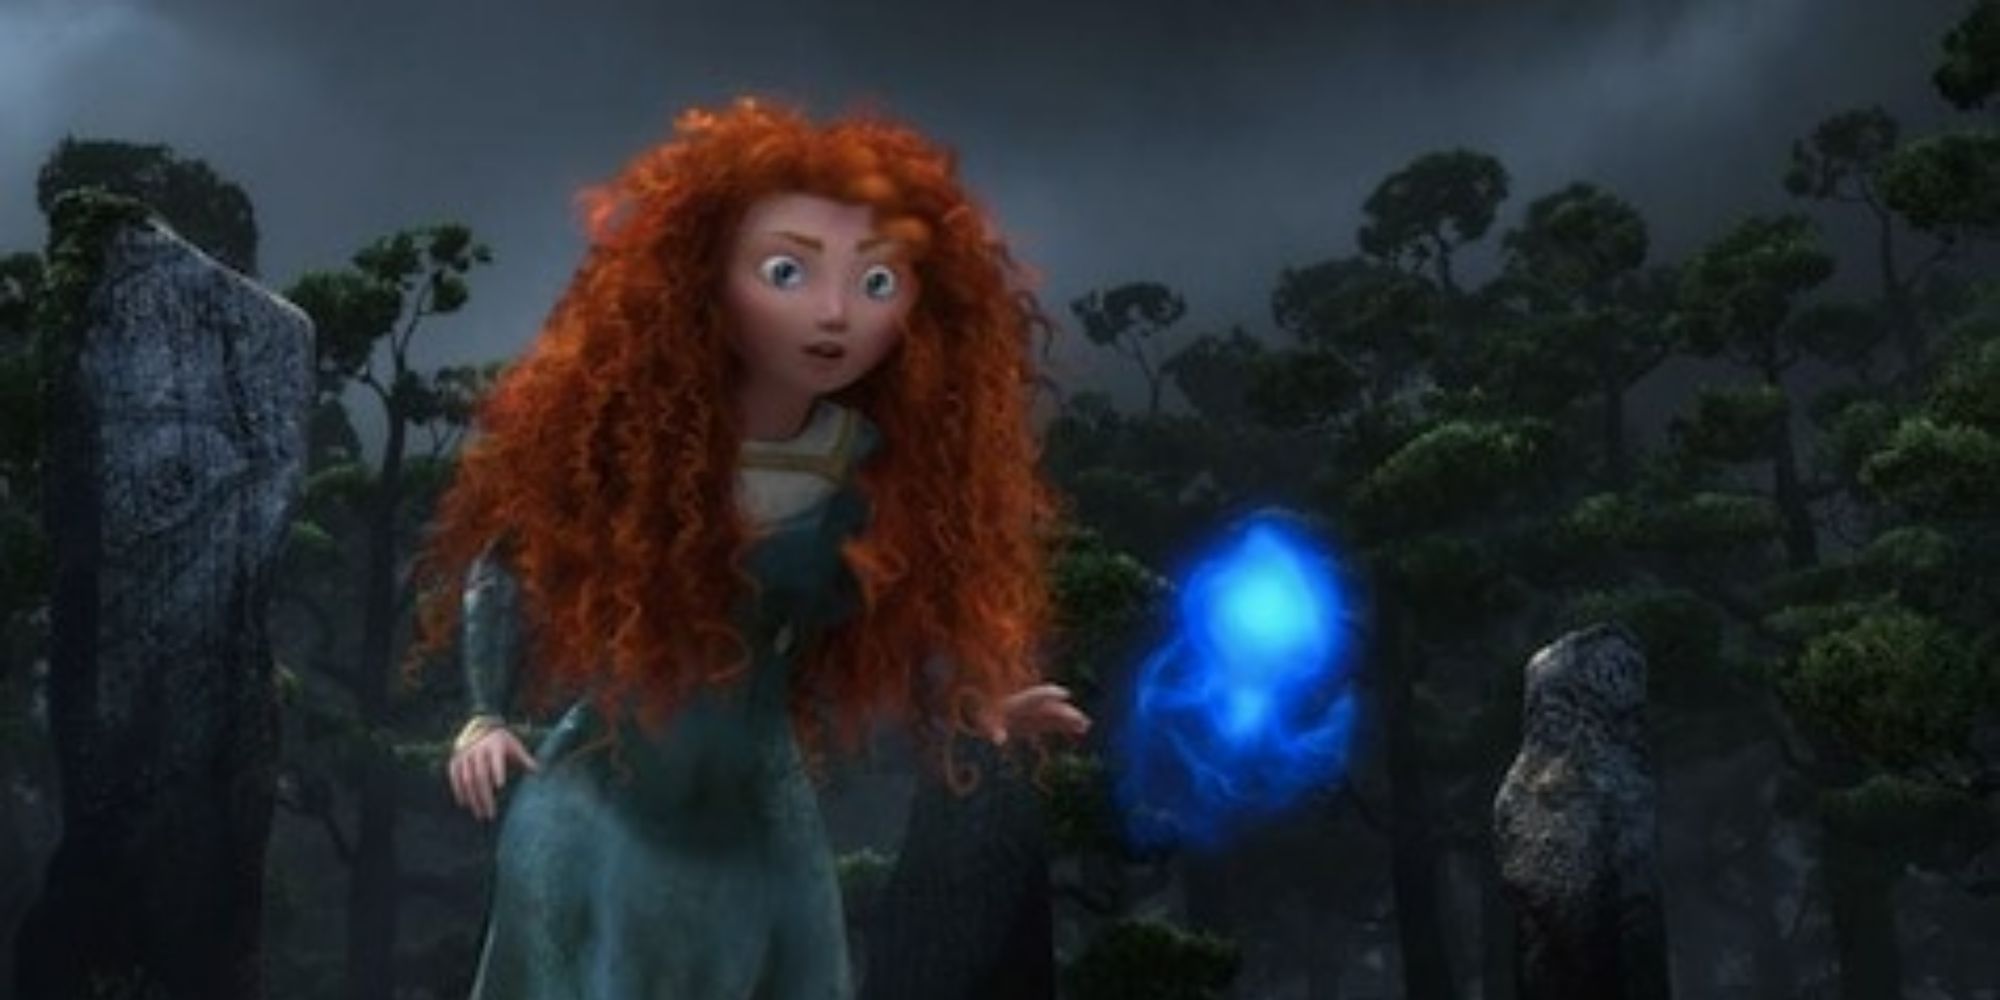 Merida walking to a blue light in Brave